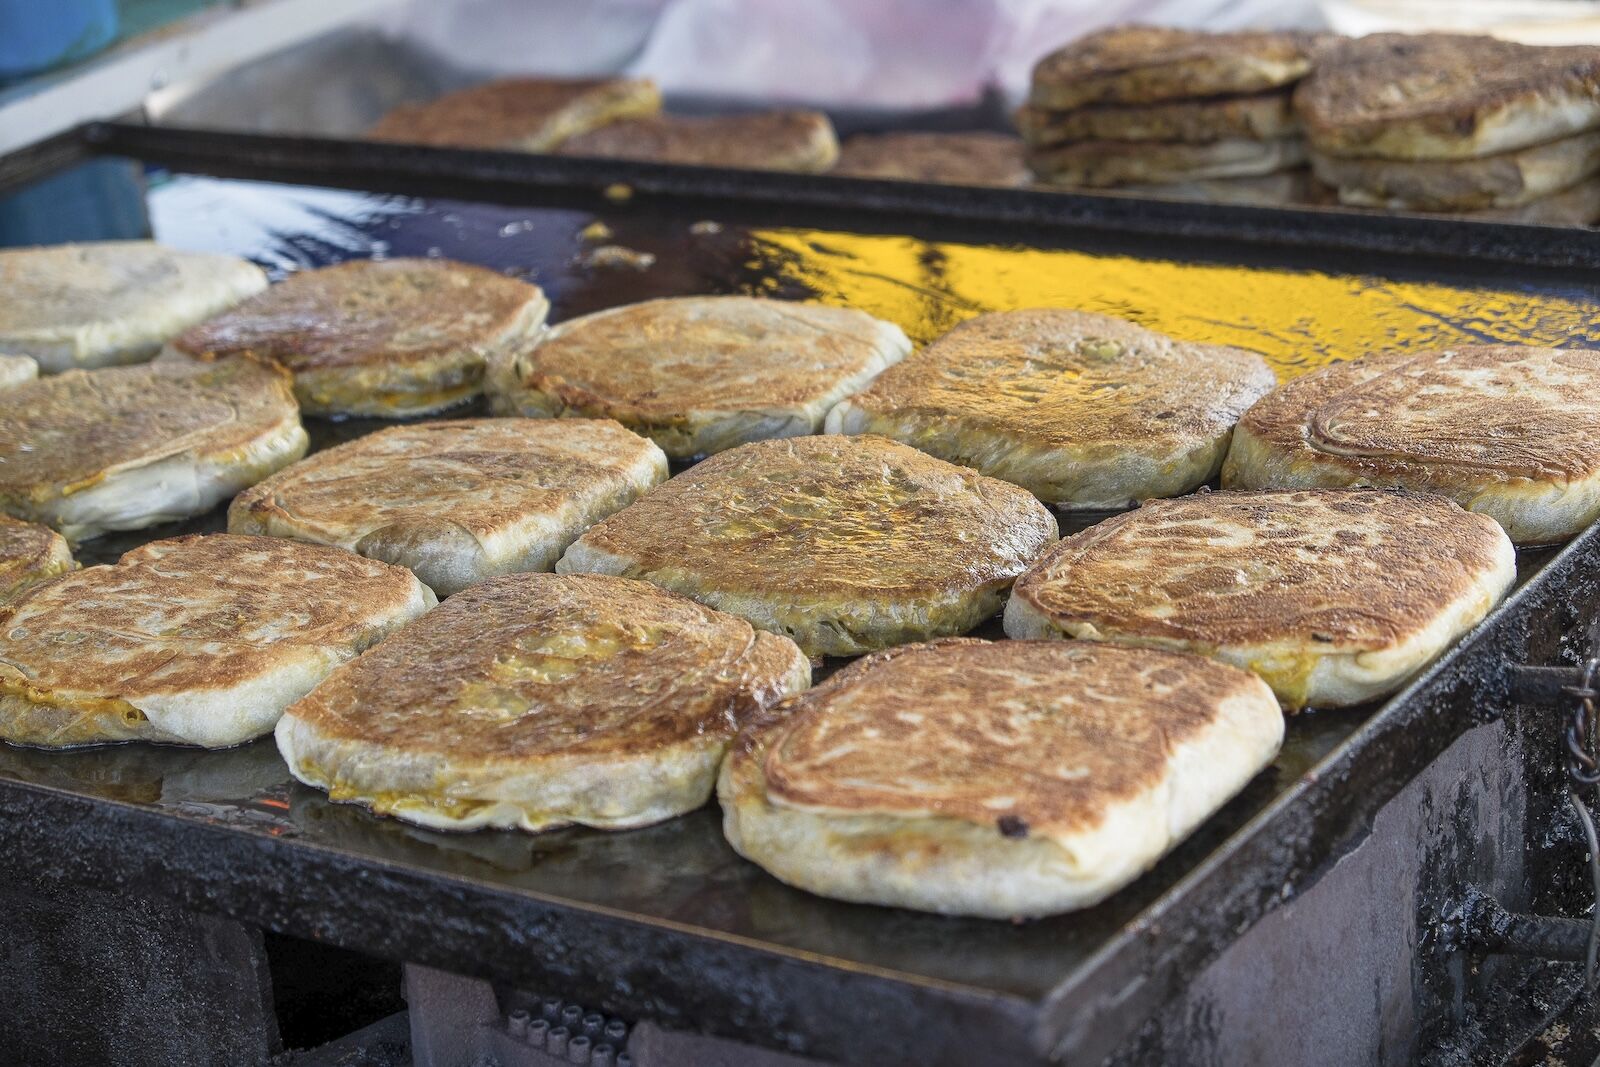 Murtabak or martabak, also mutabbaq, is a stuffed pancake or pan-fried bread which is commonly found in Saudi Arabia, Yemen, India, Indonesia, Malaysia, Singapore, Brunei and Thailand.